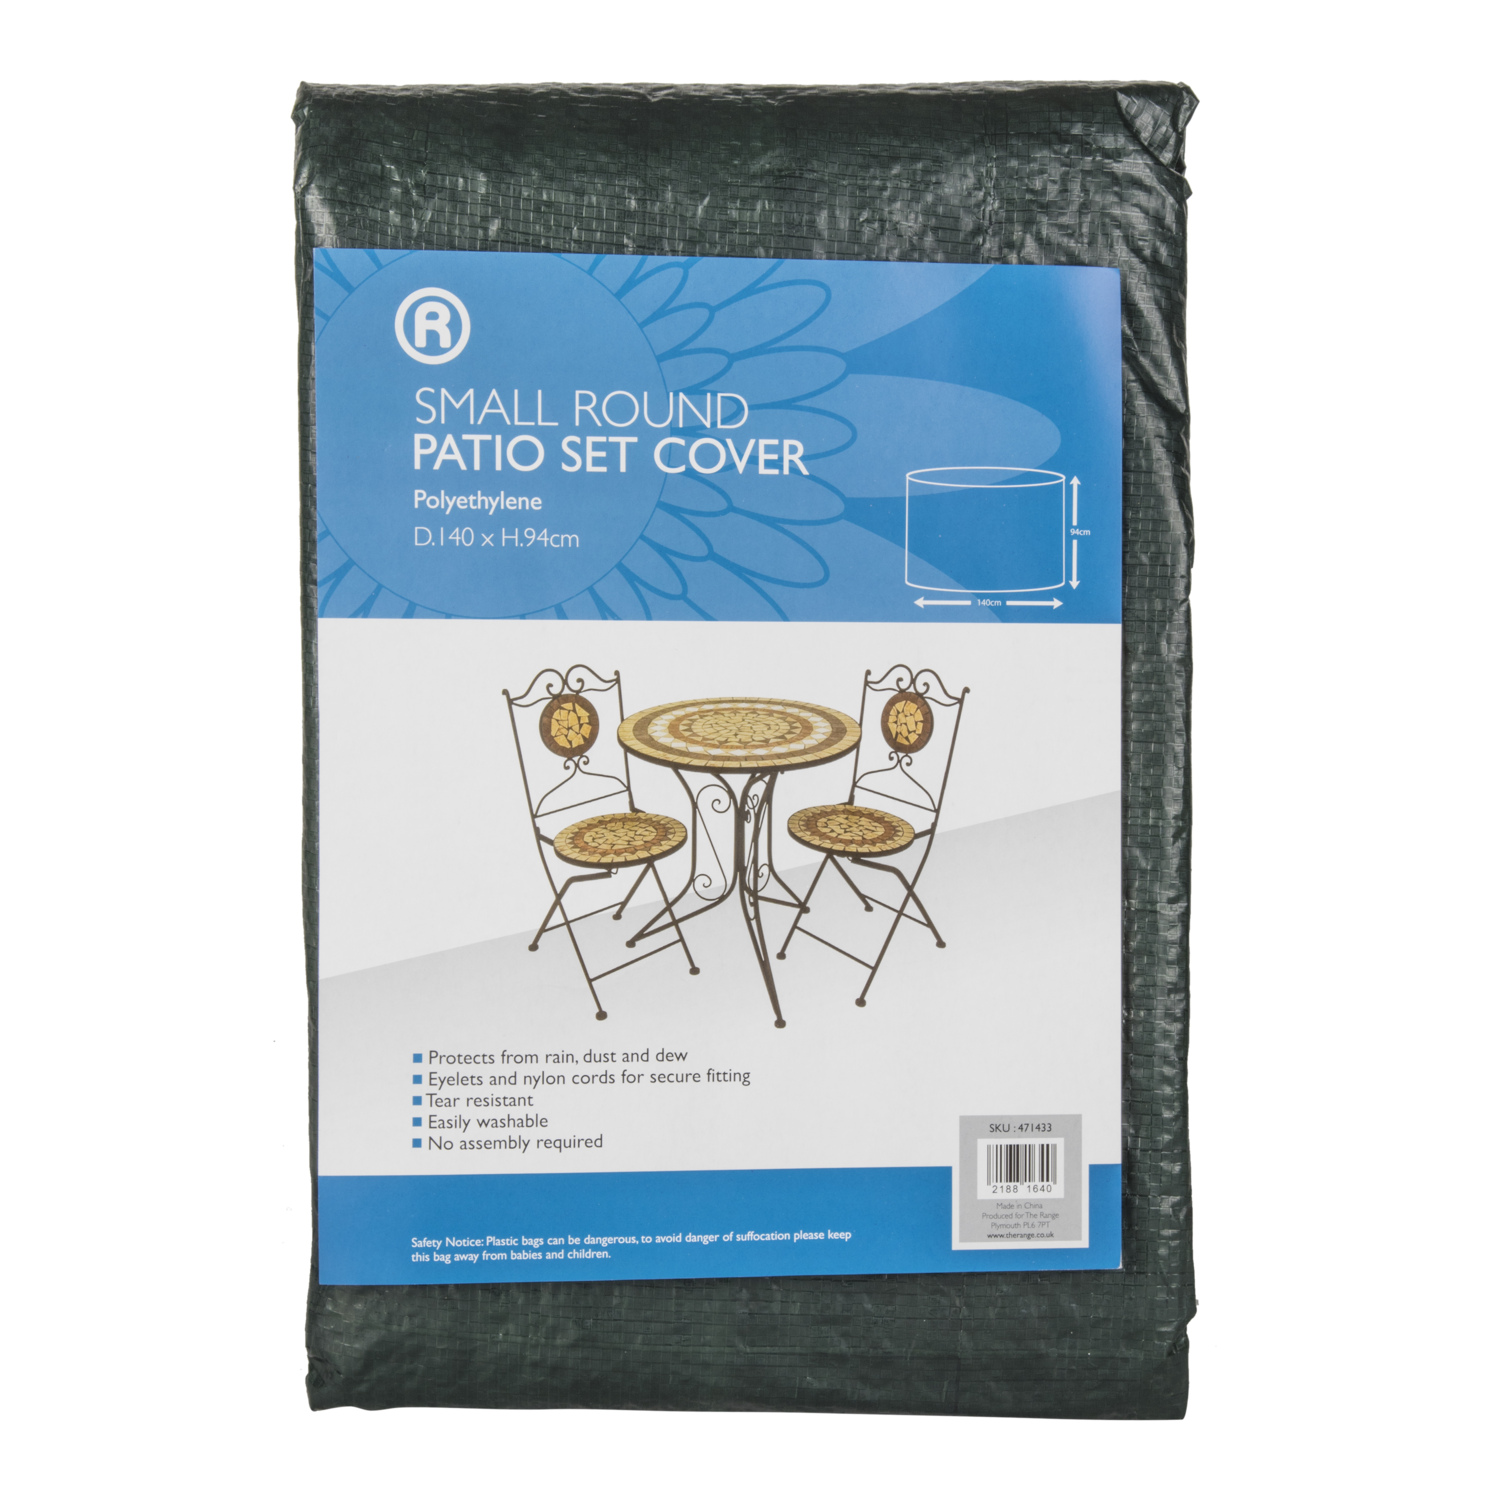 Small Round Patio Set Cover Image